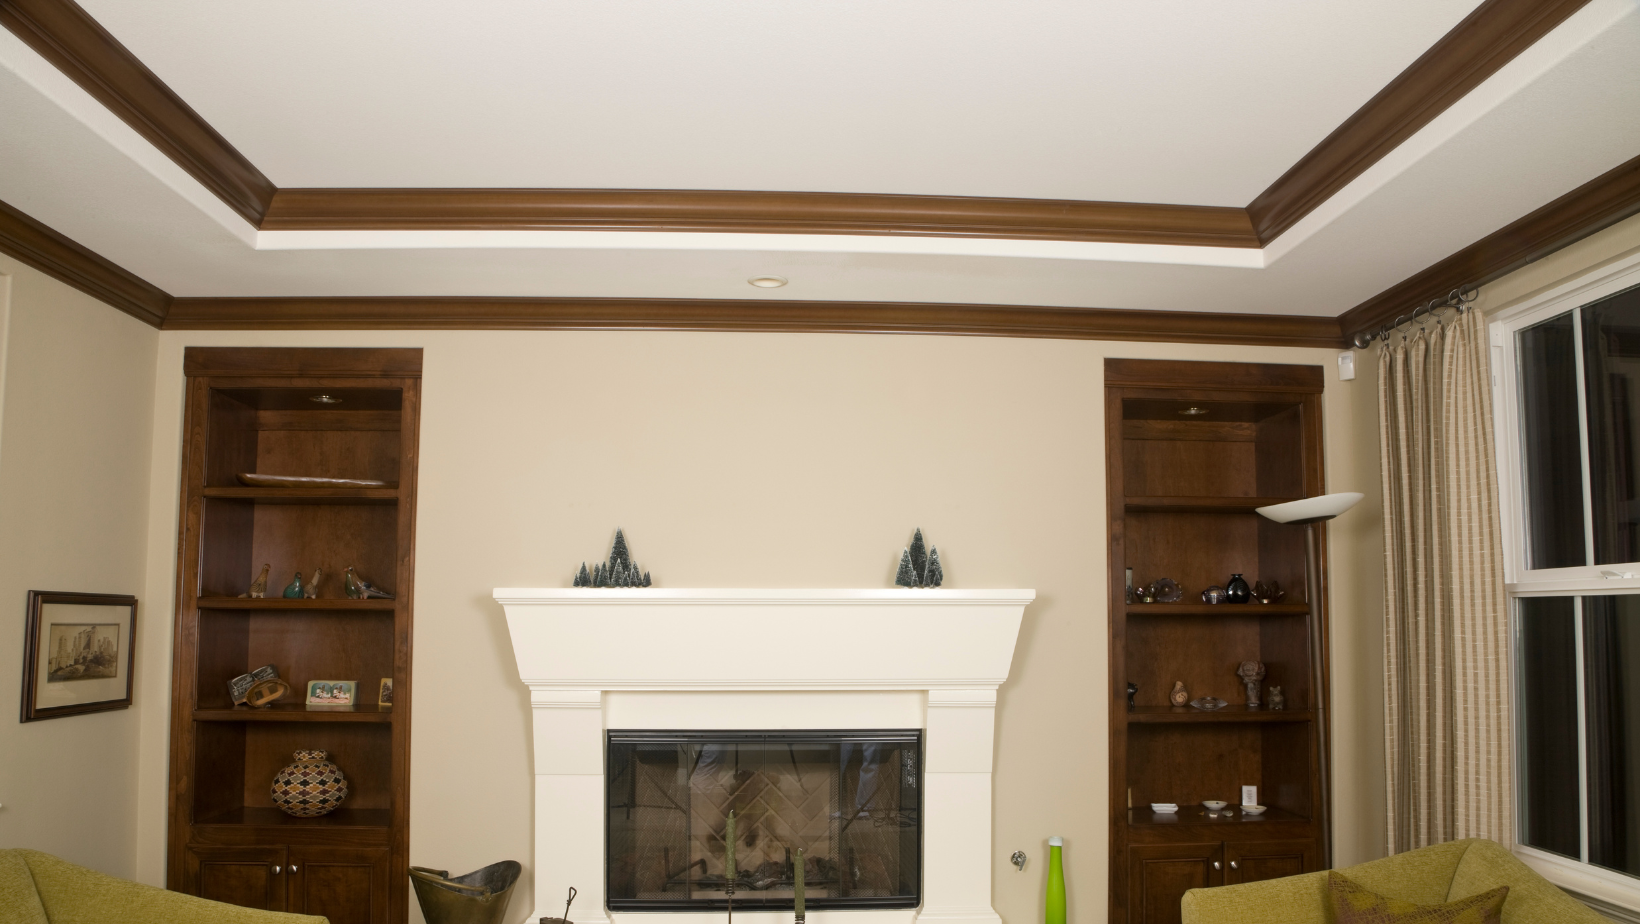 Can I Paint Crown Molding an Accent Color?